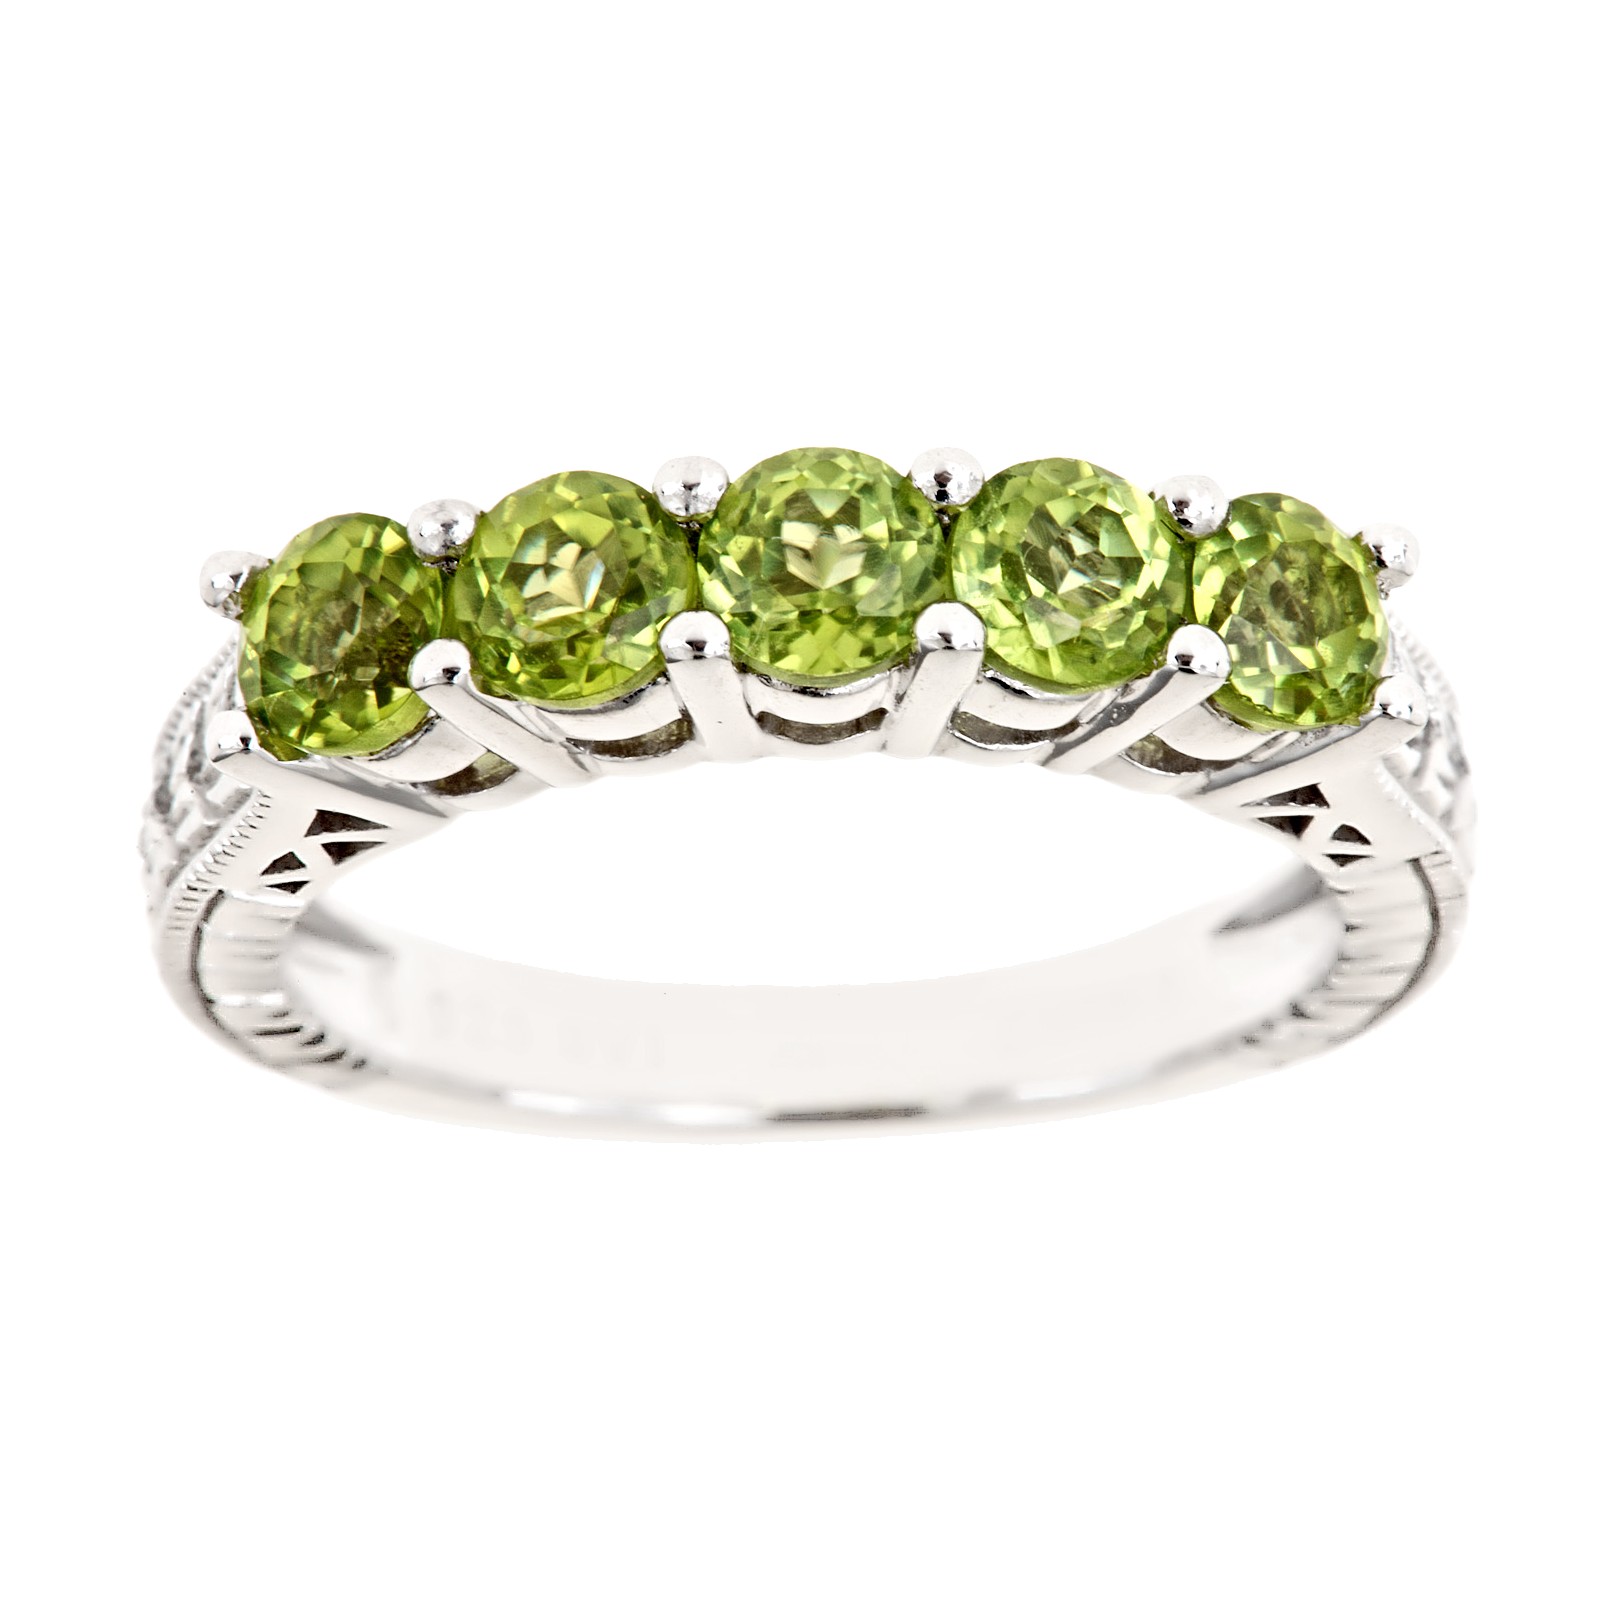 Ladies Sterling Silver 5 Stone Round Cut Peridot Ring